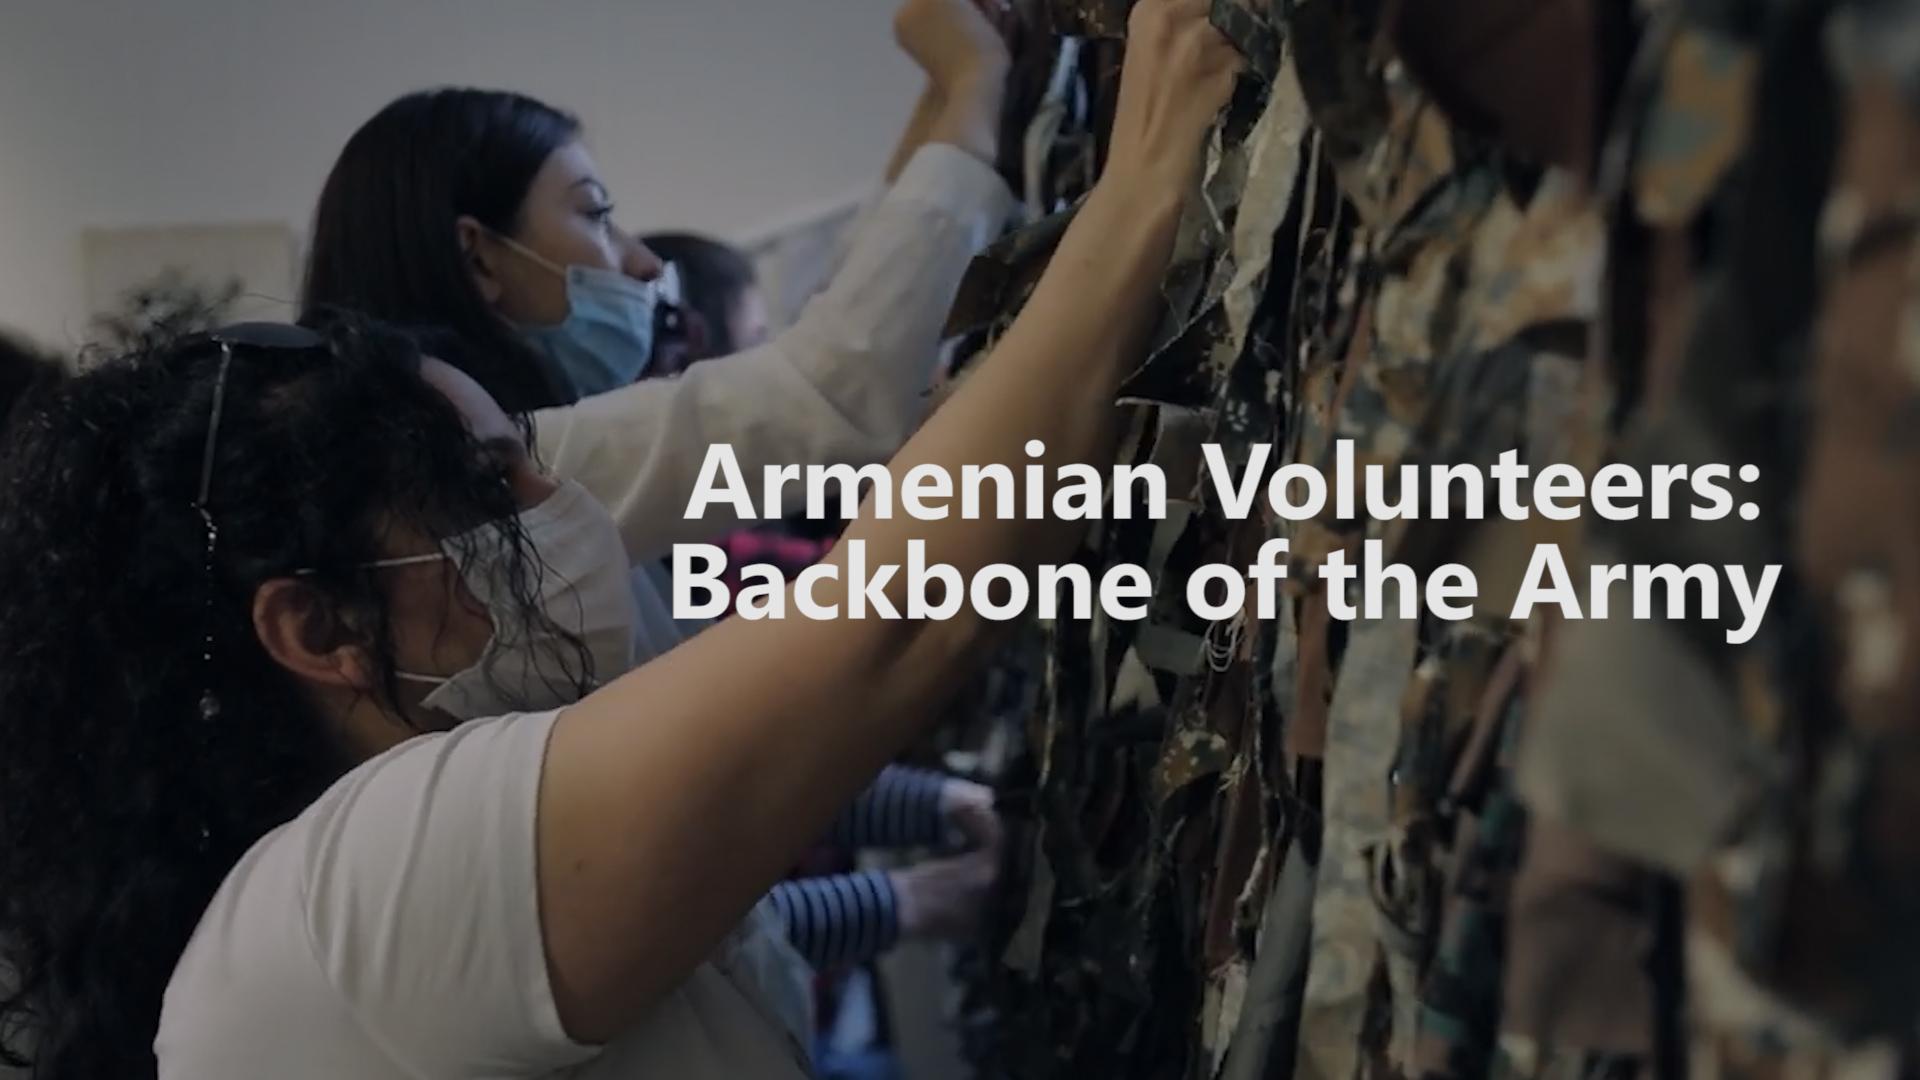 Armenian Volunteers are the Backbone of the Army